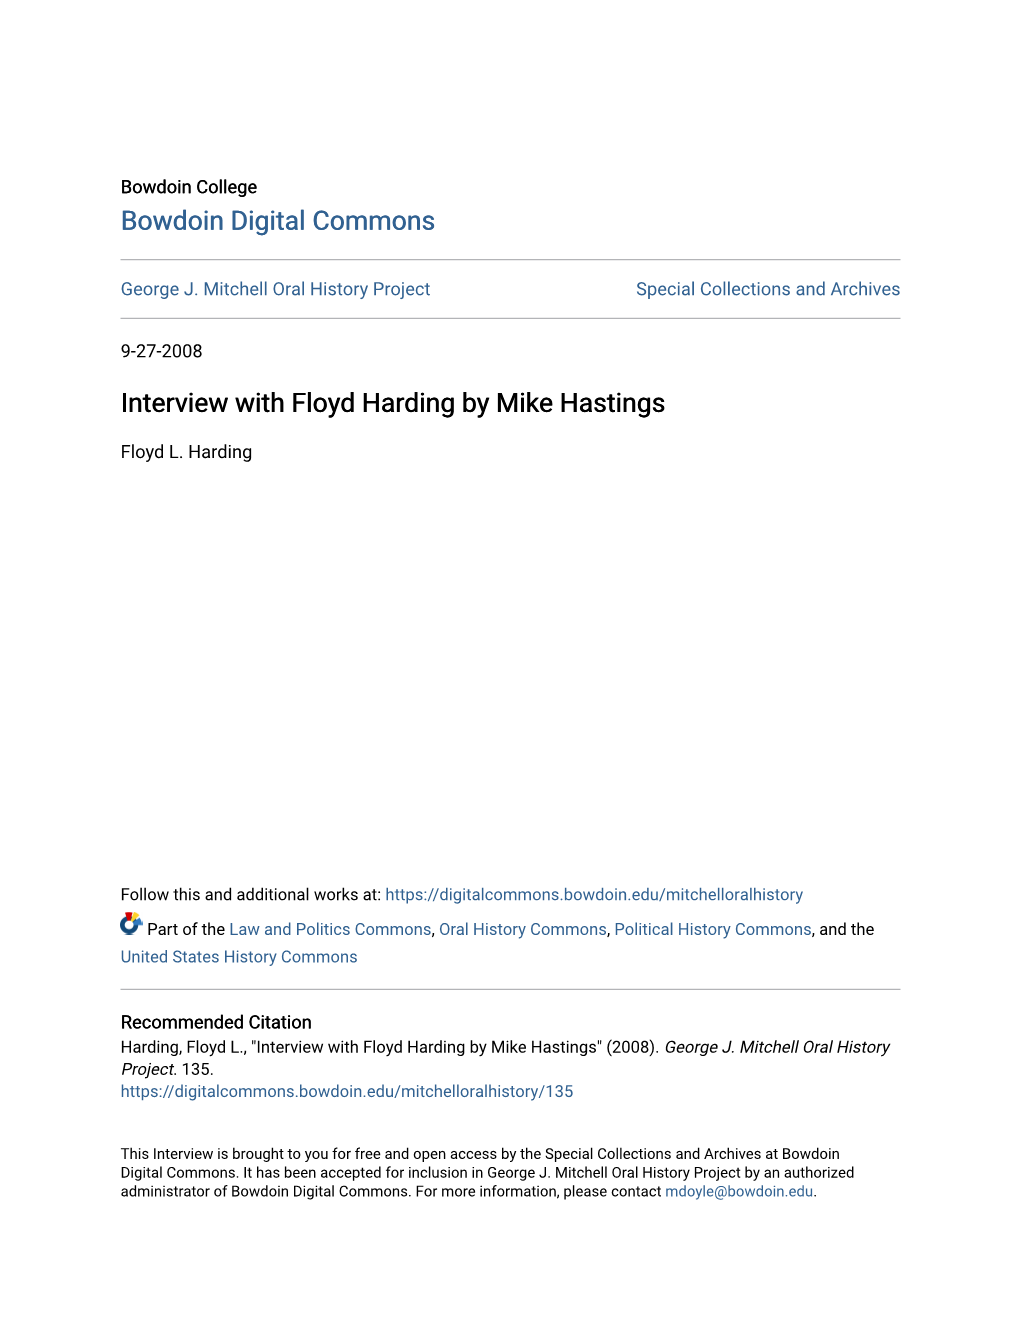 Interview with Floyd Harding by Mike Hastings